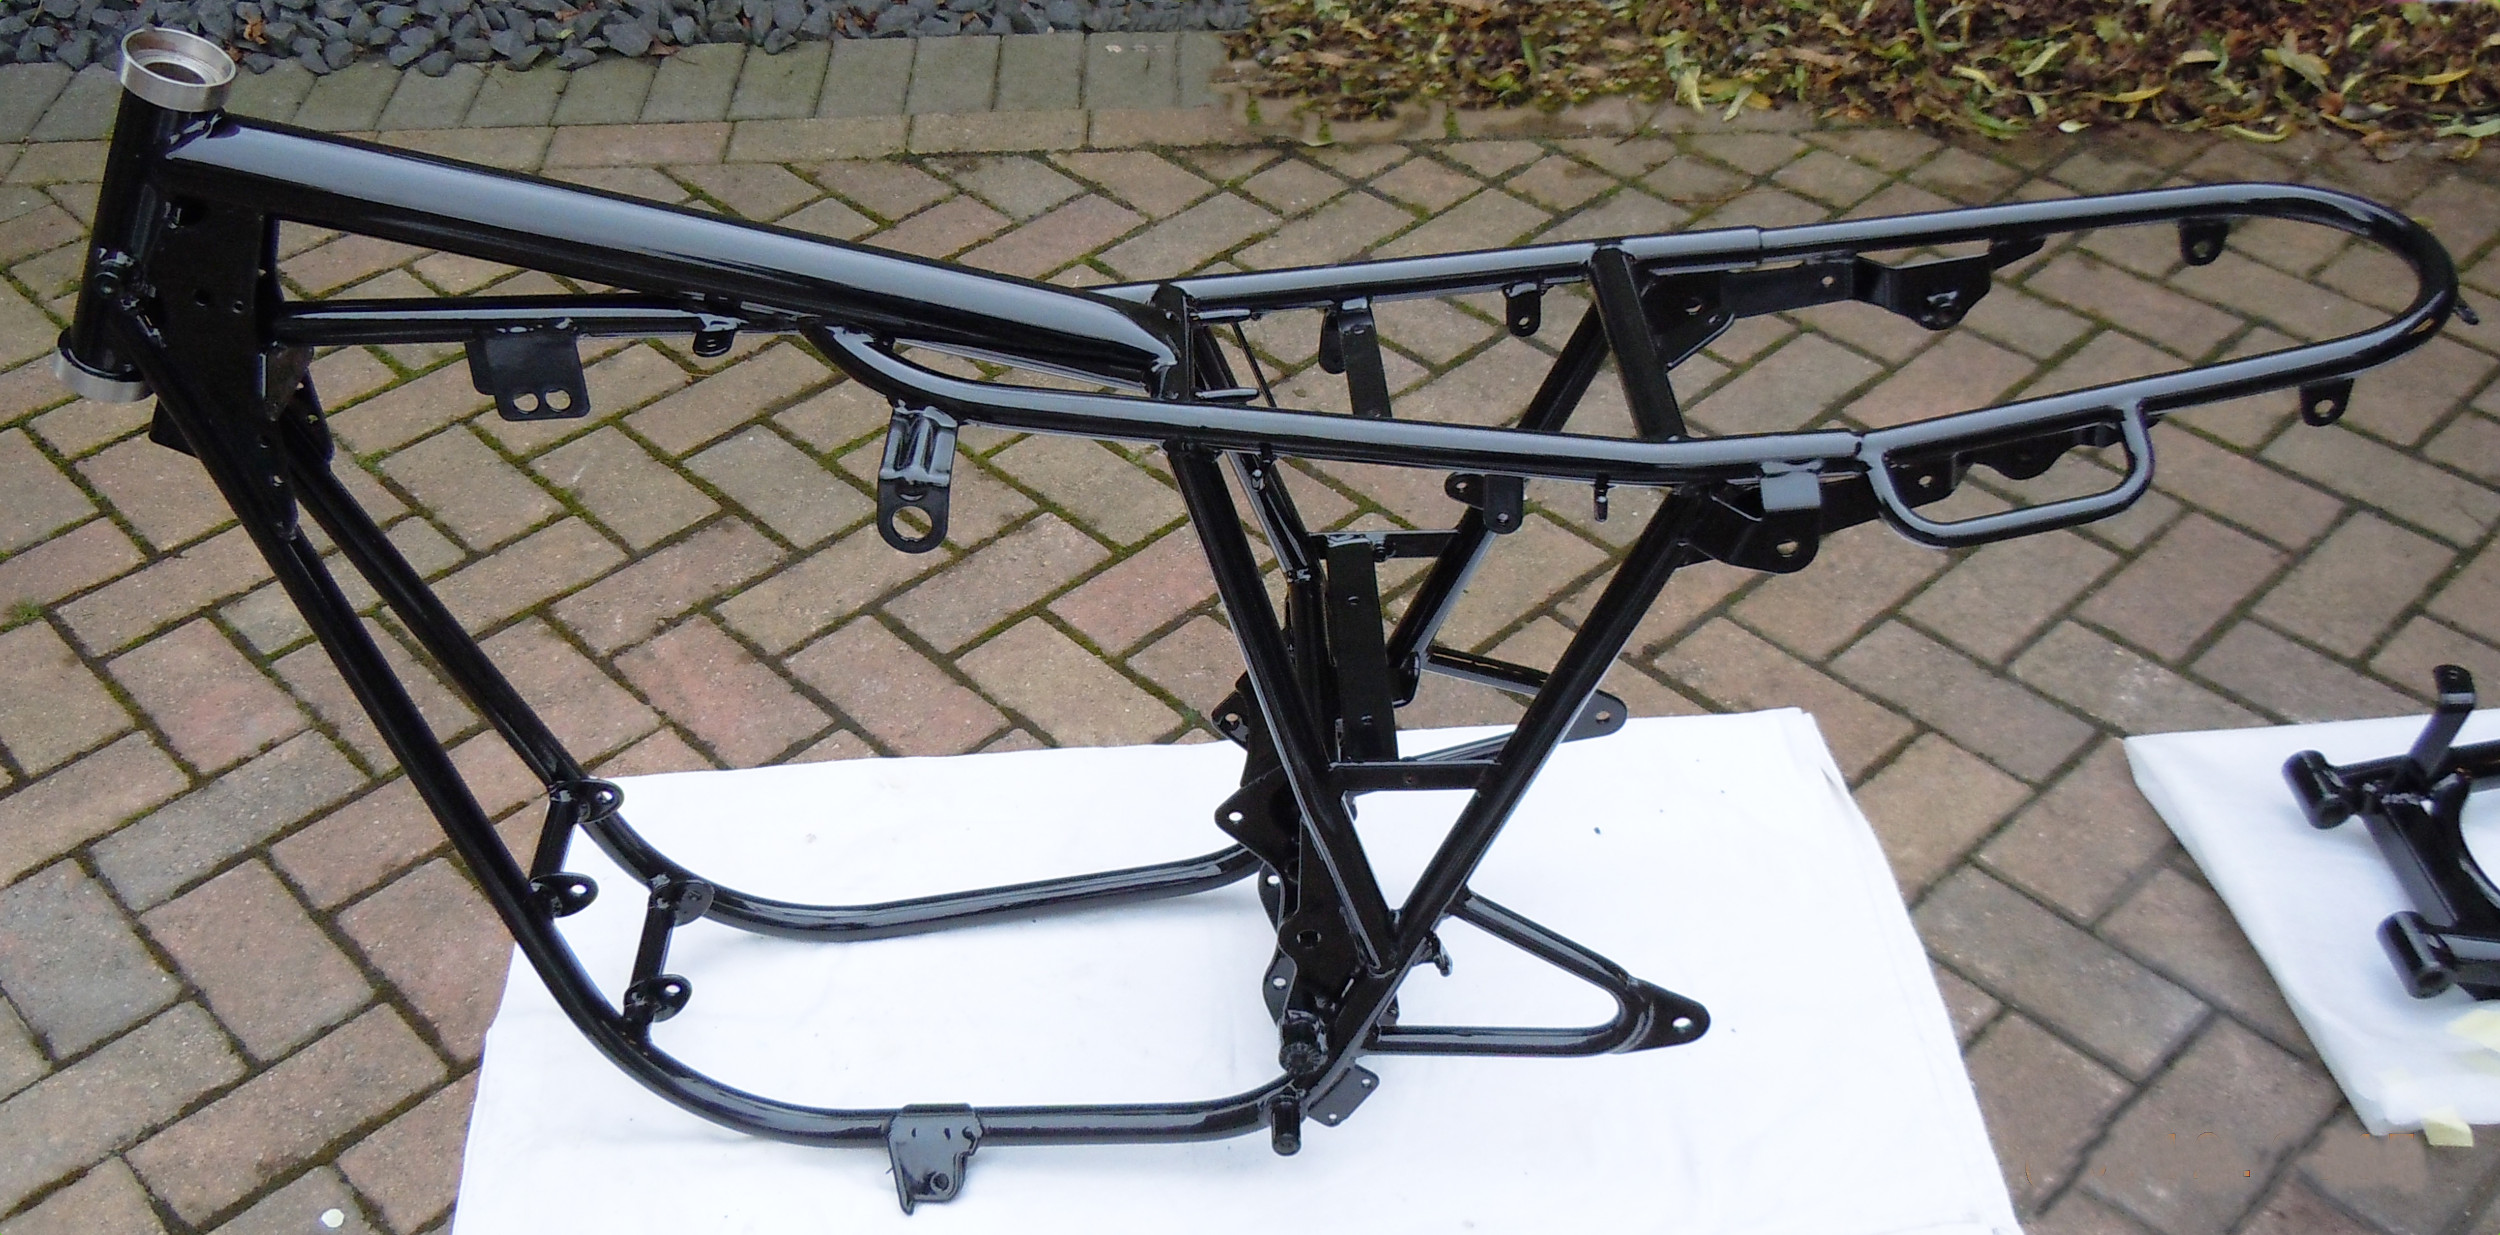 Frame - stripped and powder-coated